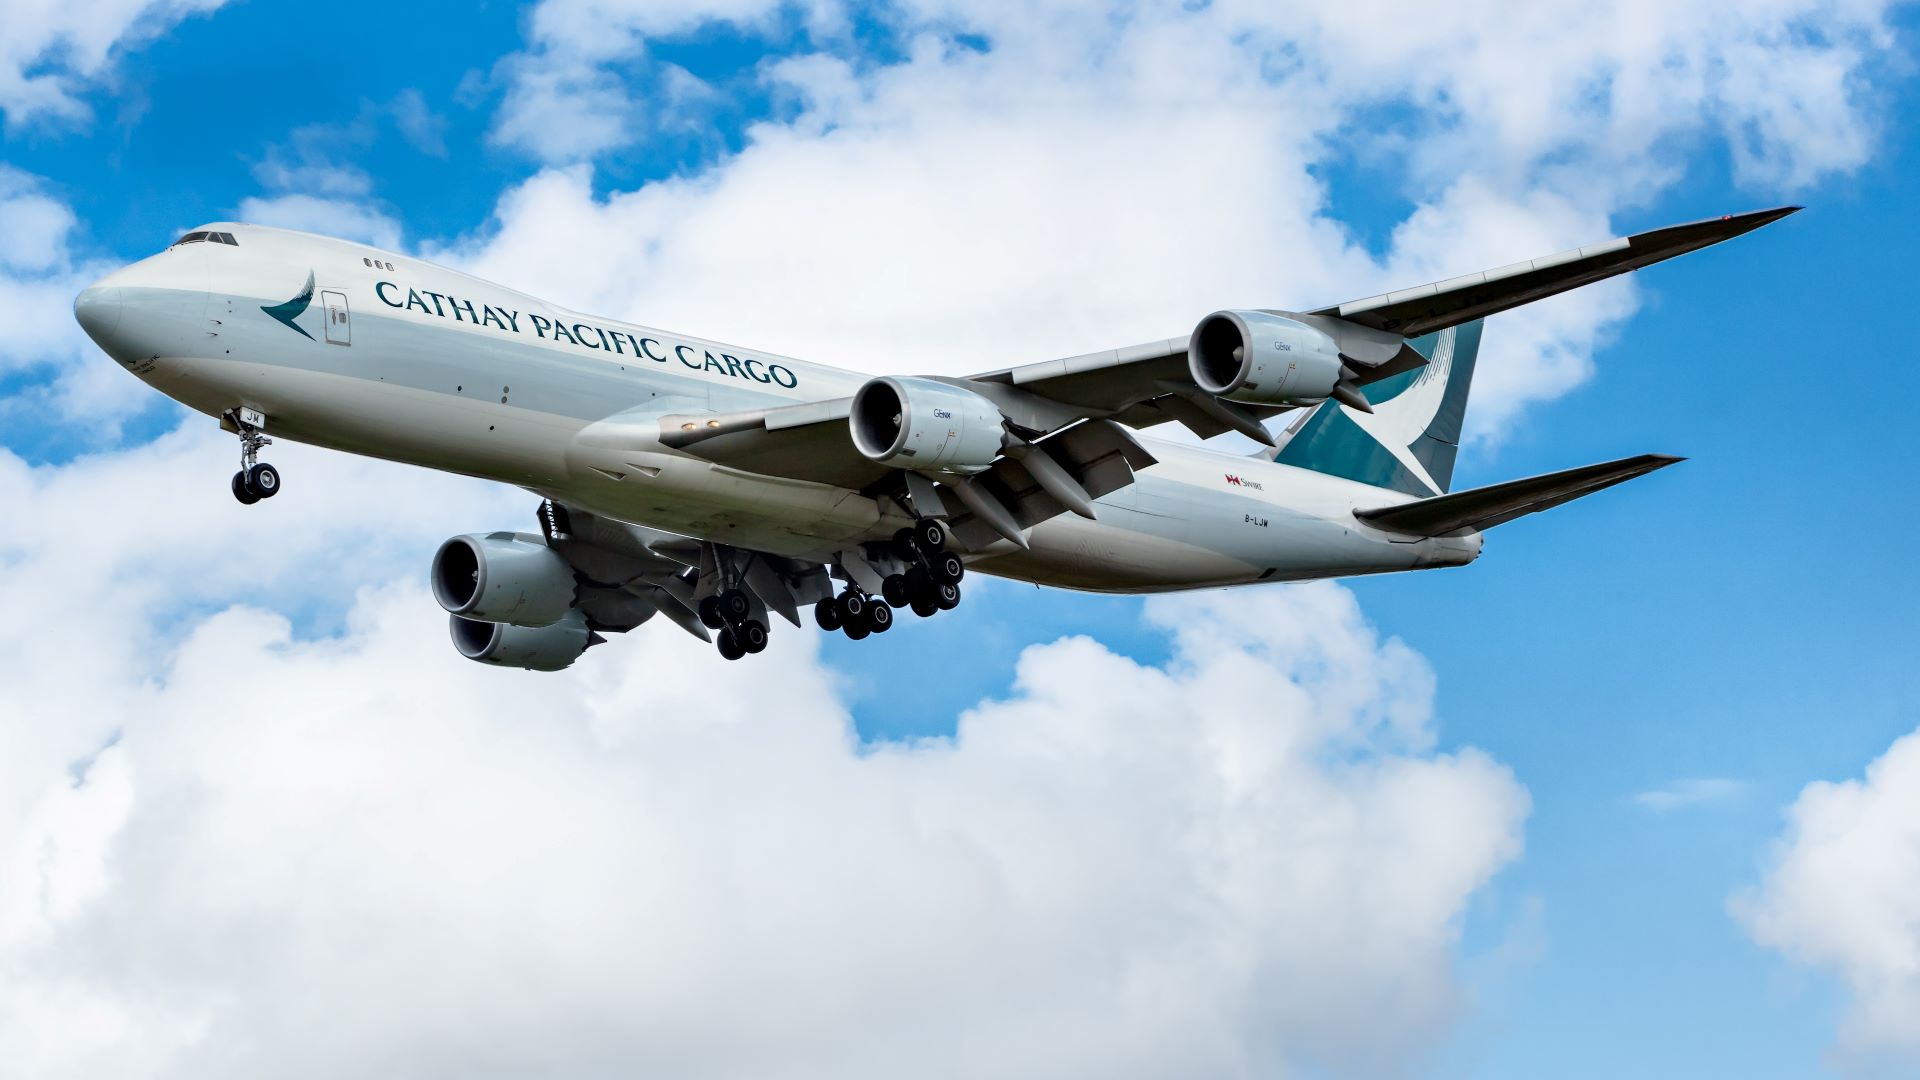 A white Cathay Pacific Cargo jumbo jet with teal tail viewed from below against blue sky as it comes in for a landing.